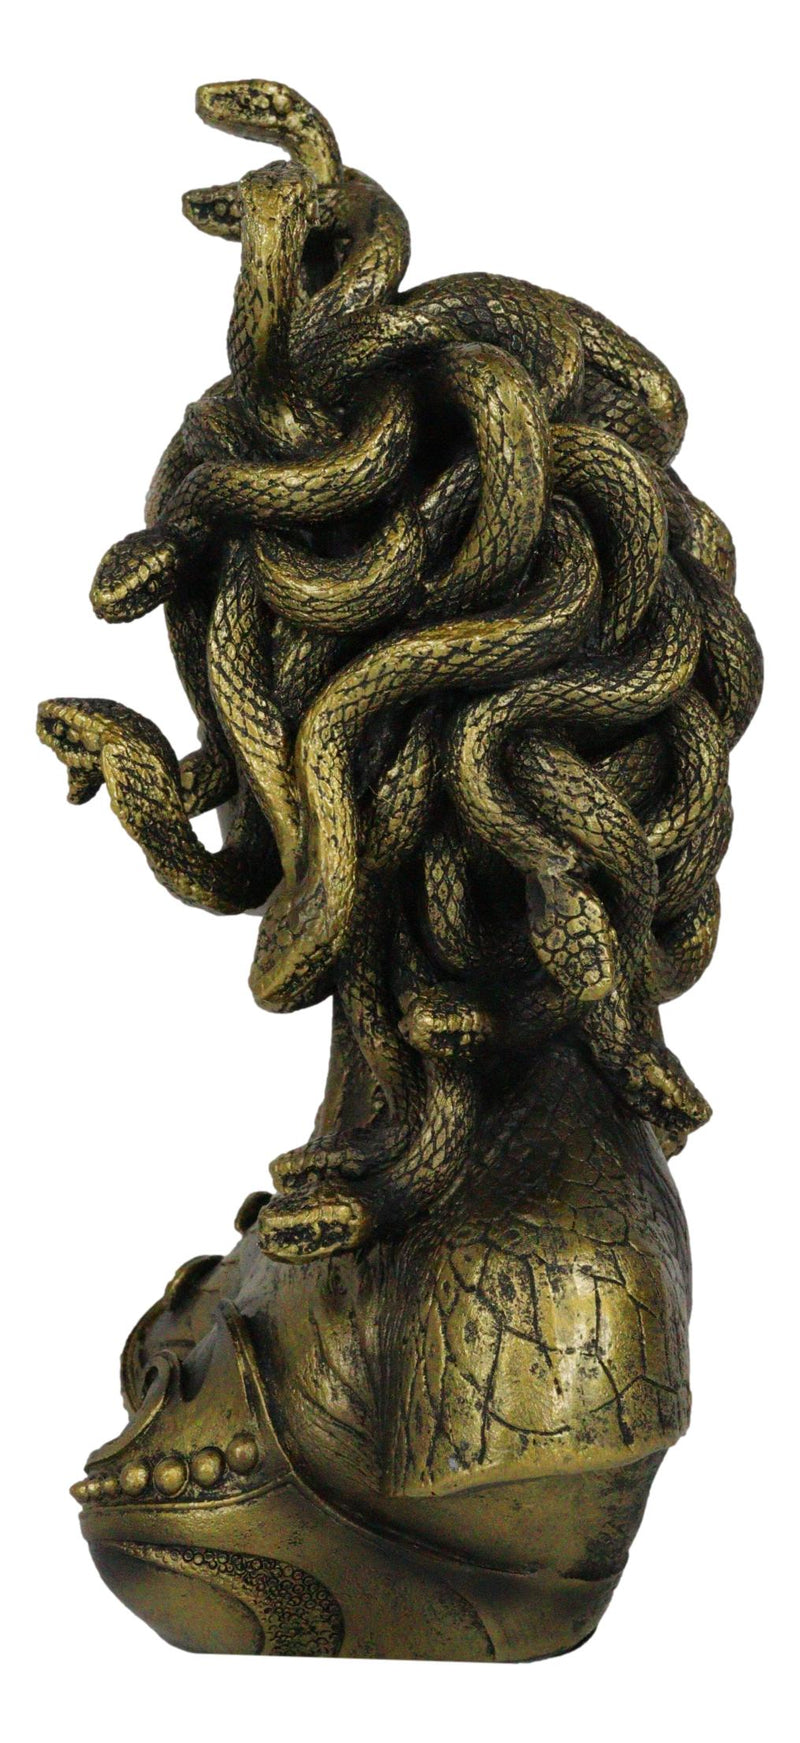 gorgon medusa and her sisters